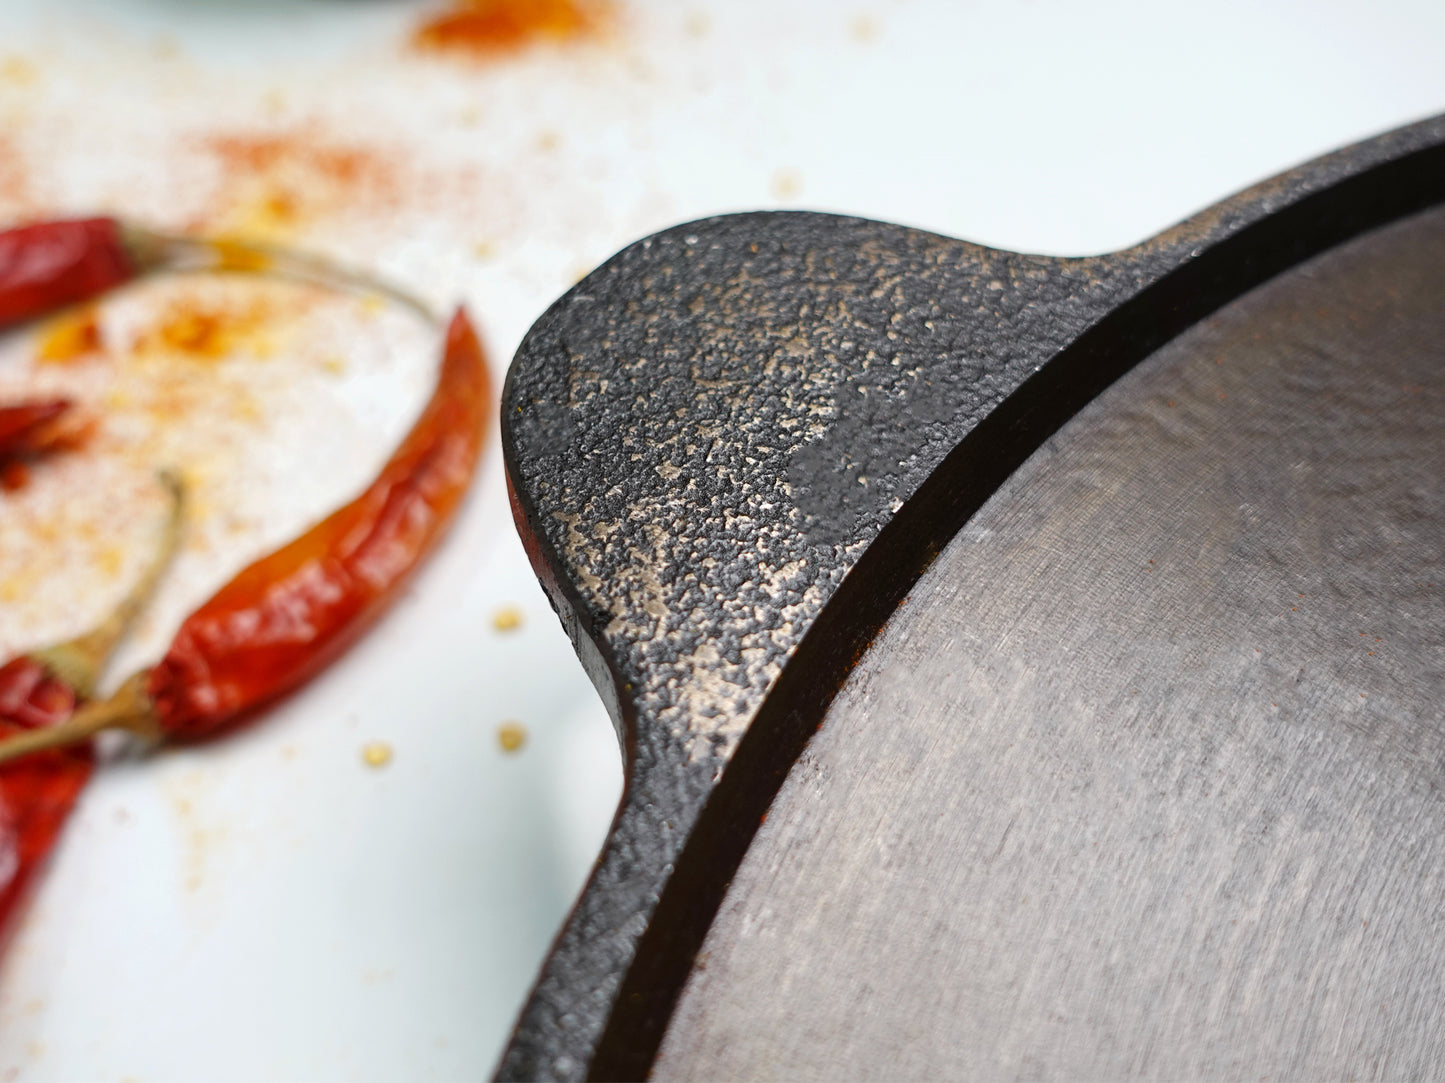 Dosa Tawa - Cast Iron - Long Handle -  Grinded.